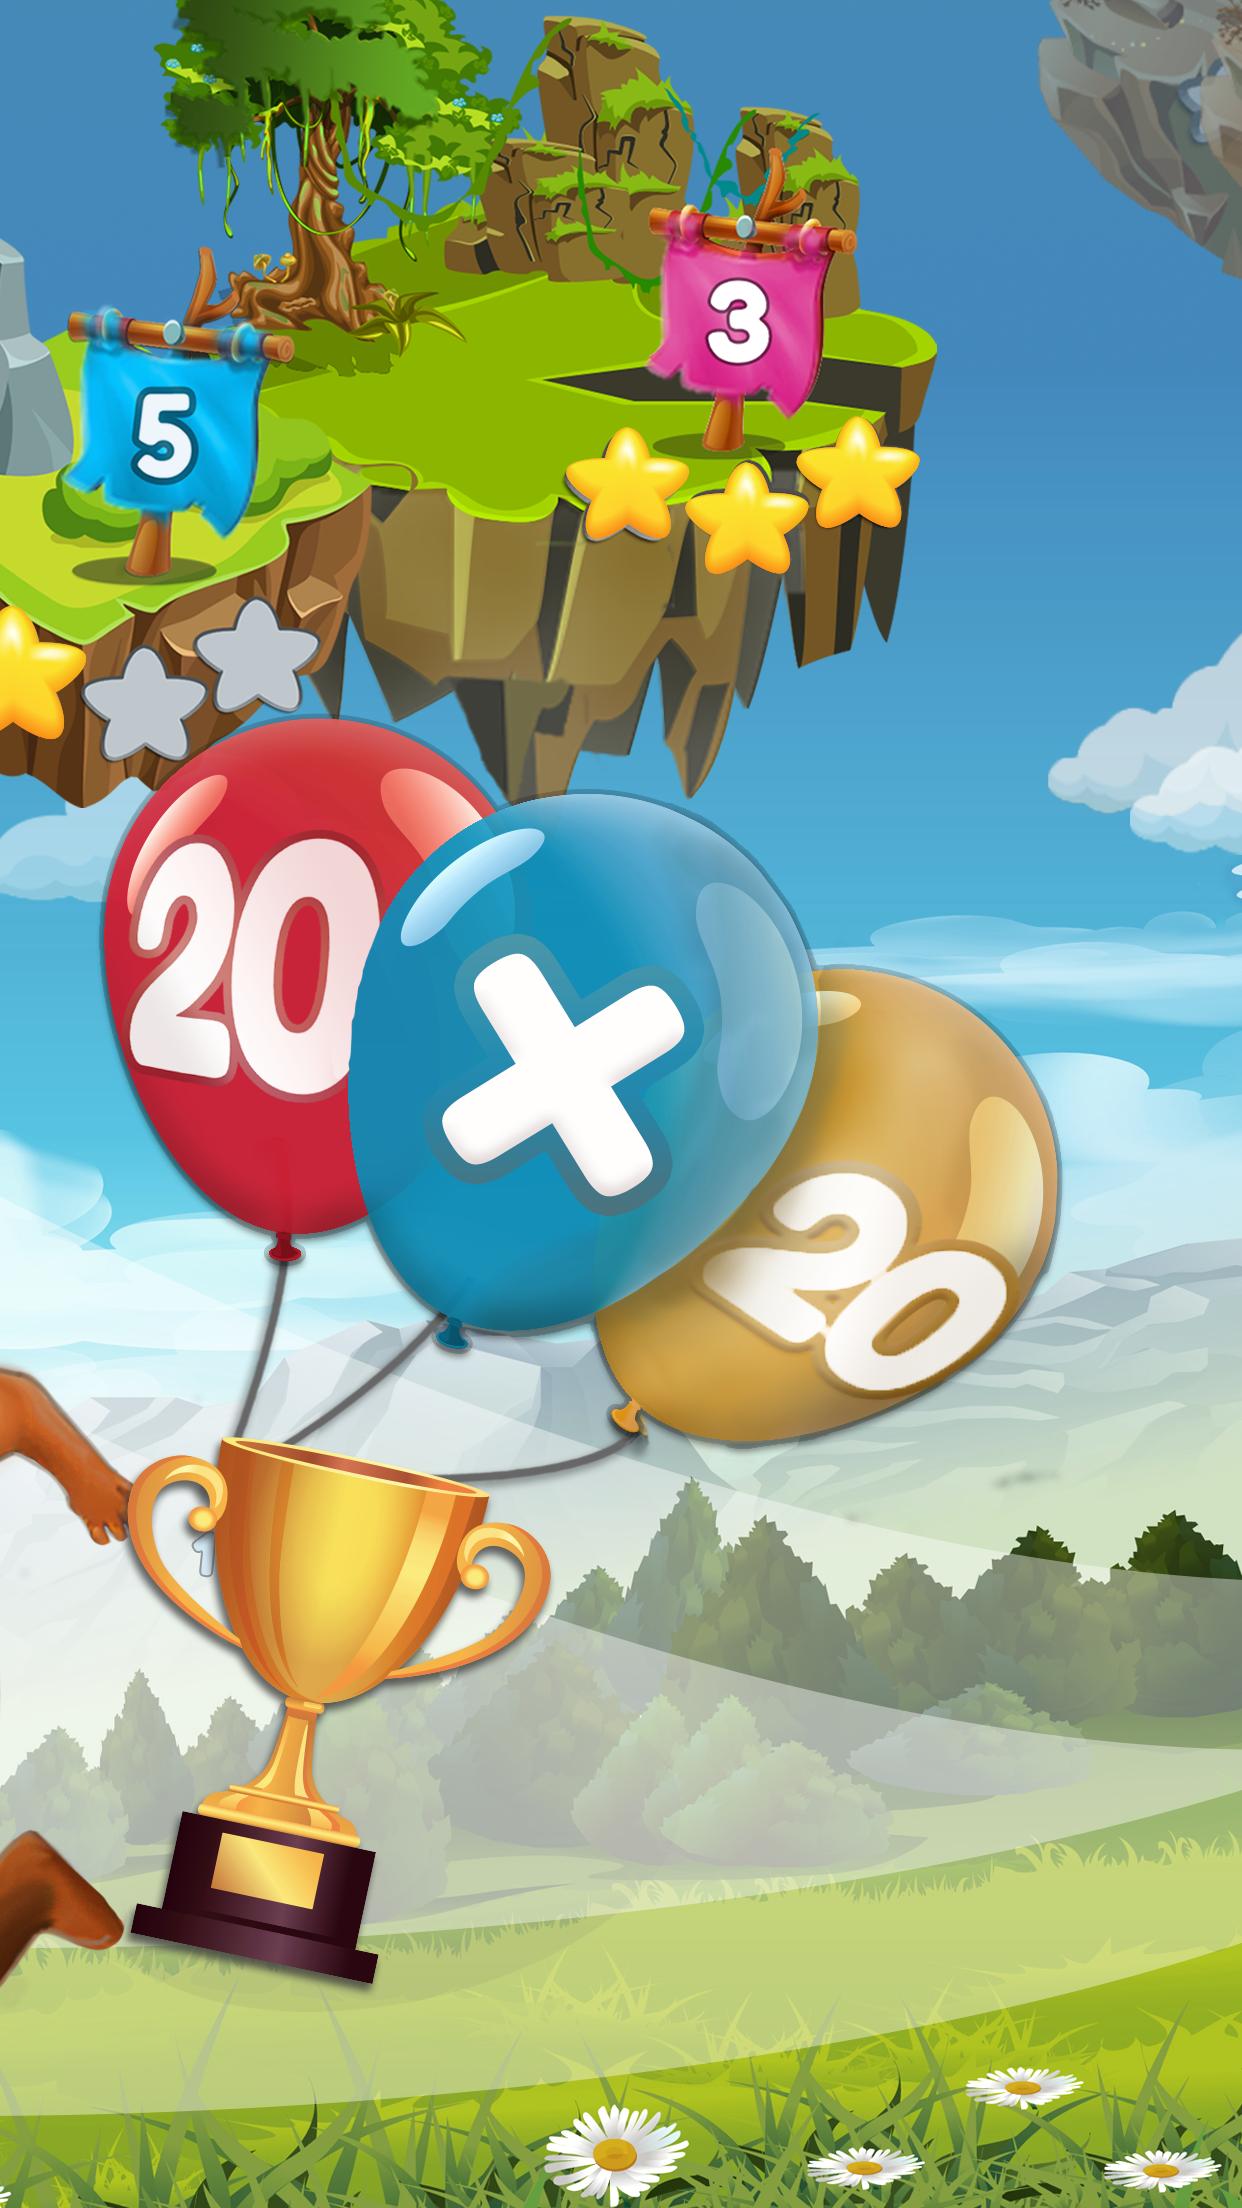 Times Tables & Friends: Free Multiplication Games 2.3.77 Screenshot 2